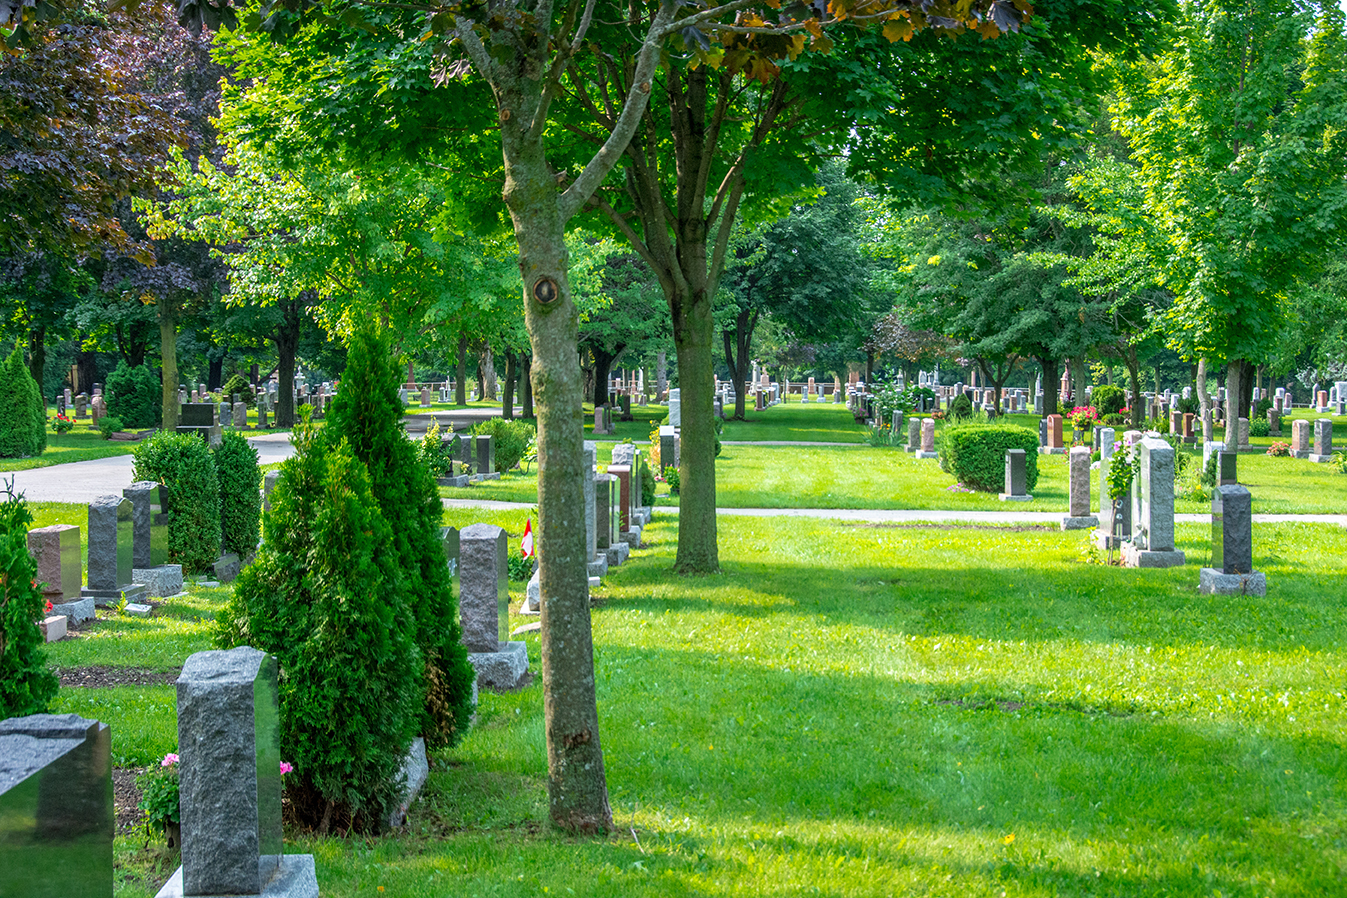 A beautiful graveyard marked with rows of headstones and lined w